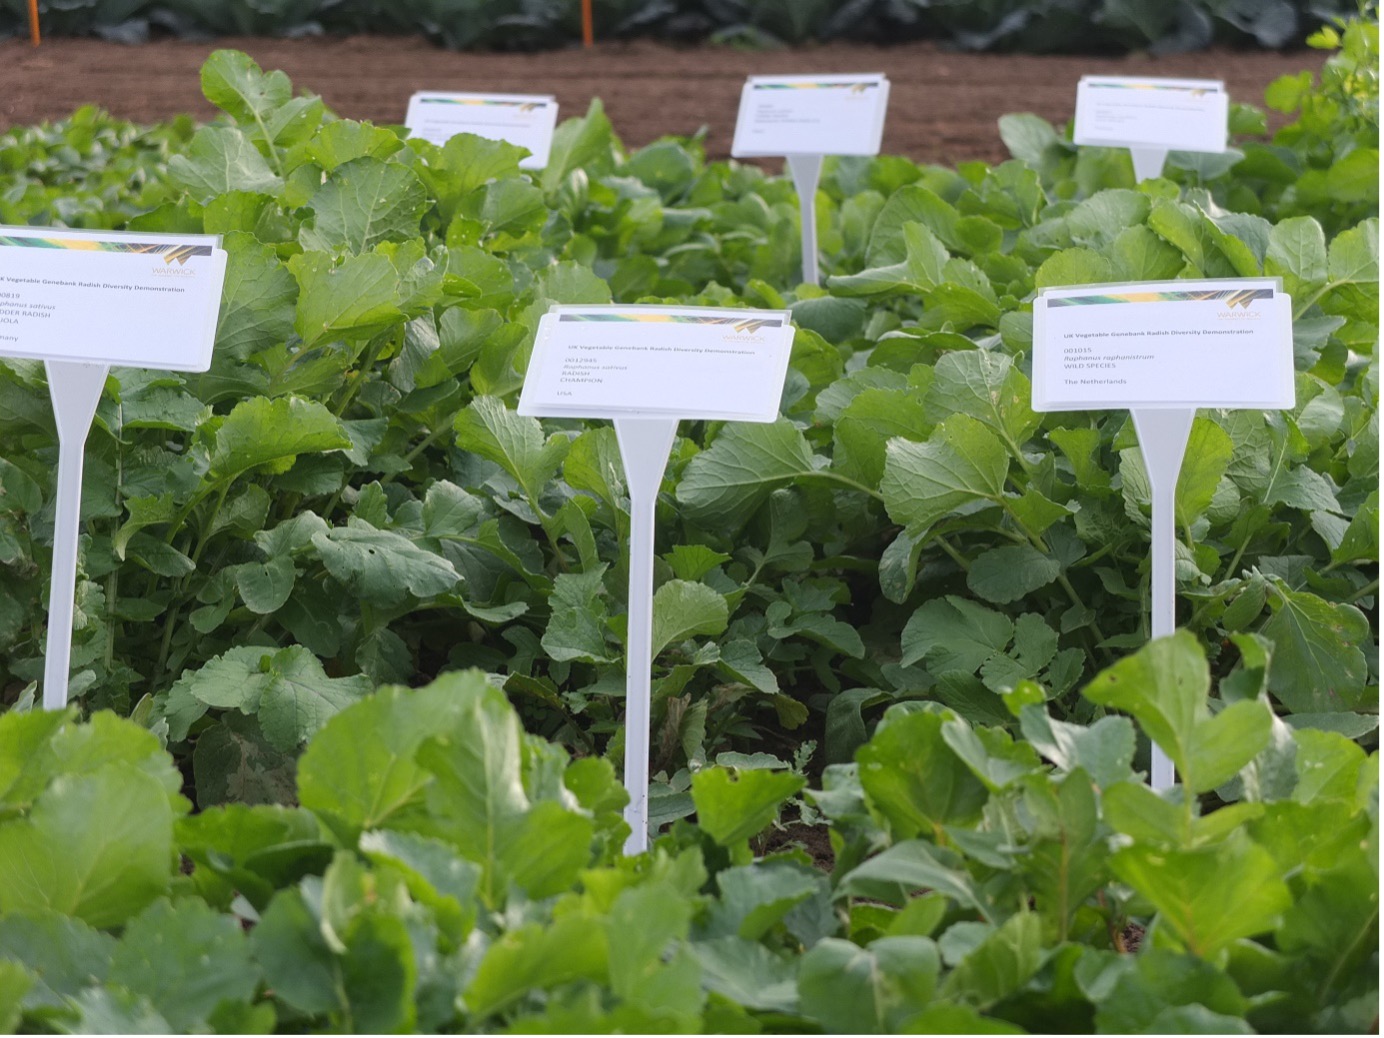 A field trial of radish varieties from the UKVGB